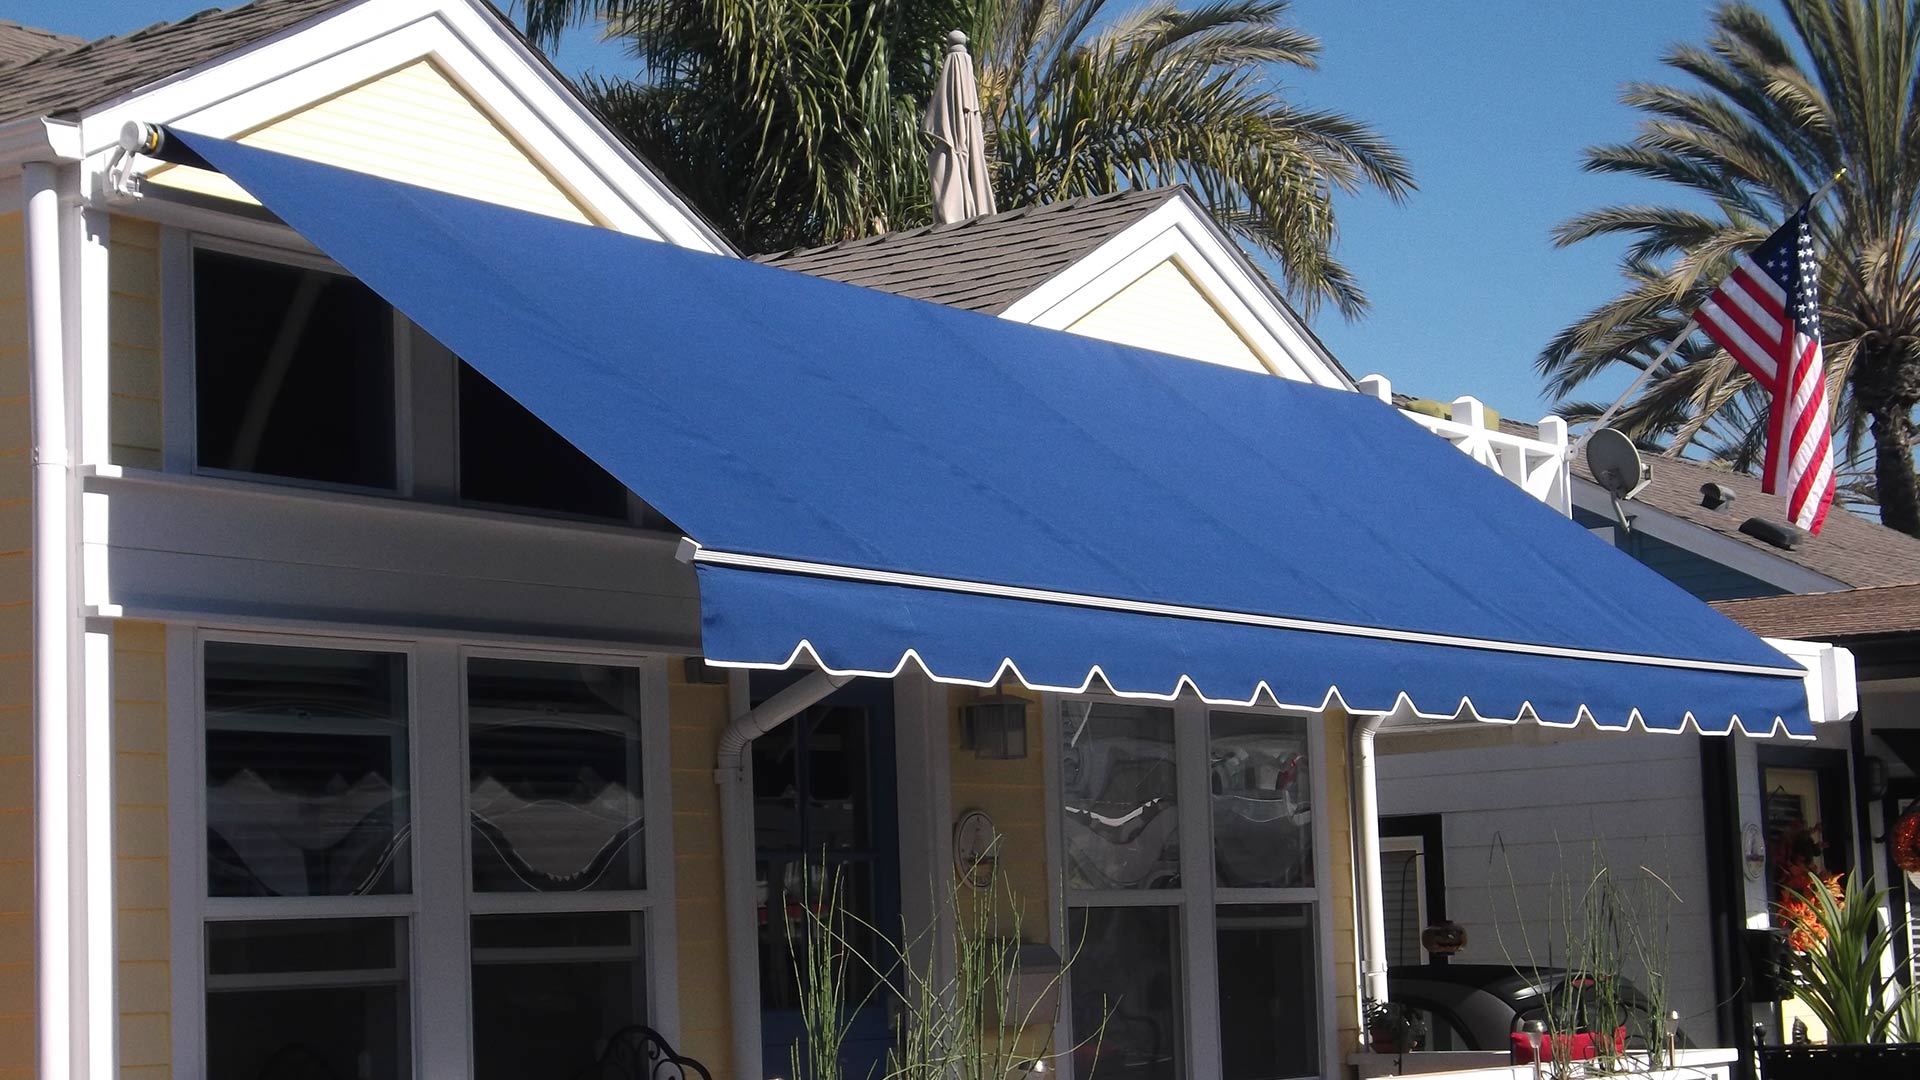 econo lux awning installed at house patio exteriors san diego ca